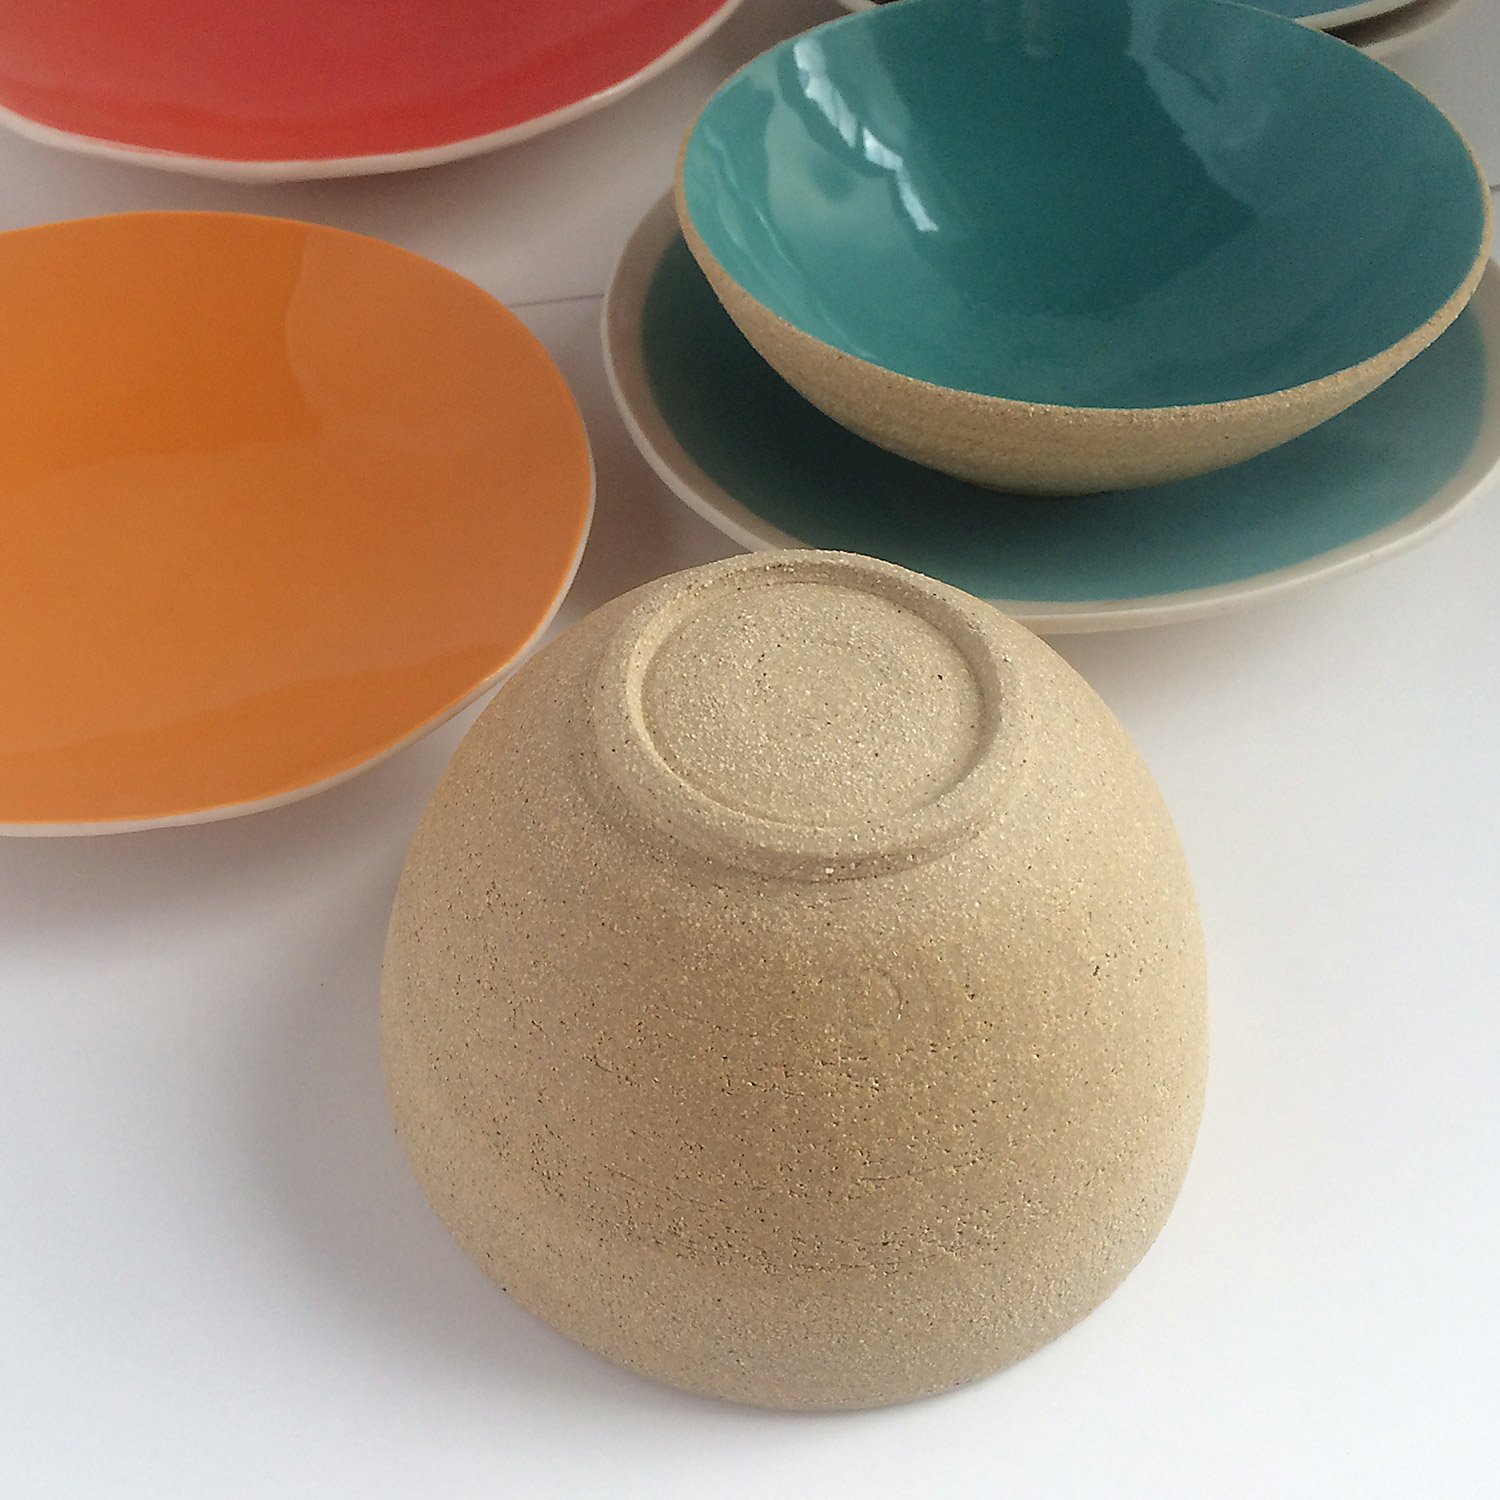 Small colored bowls